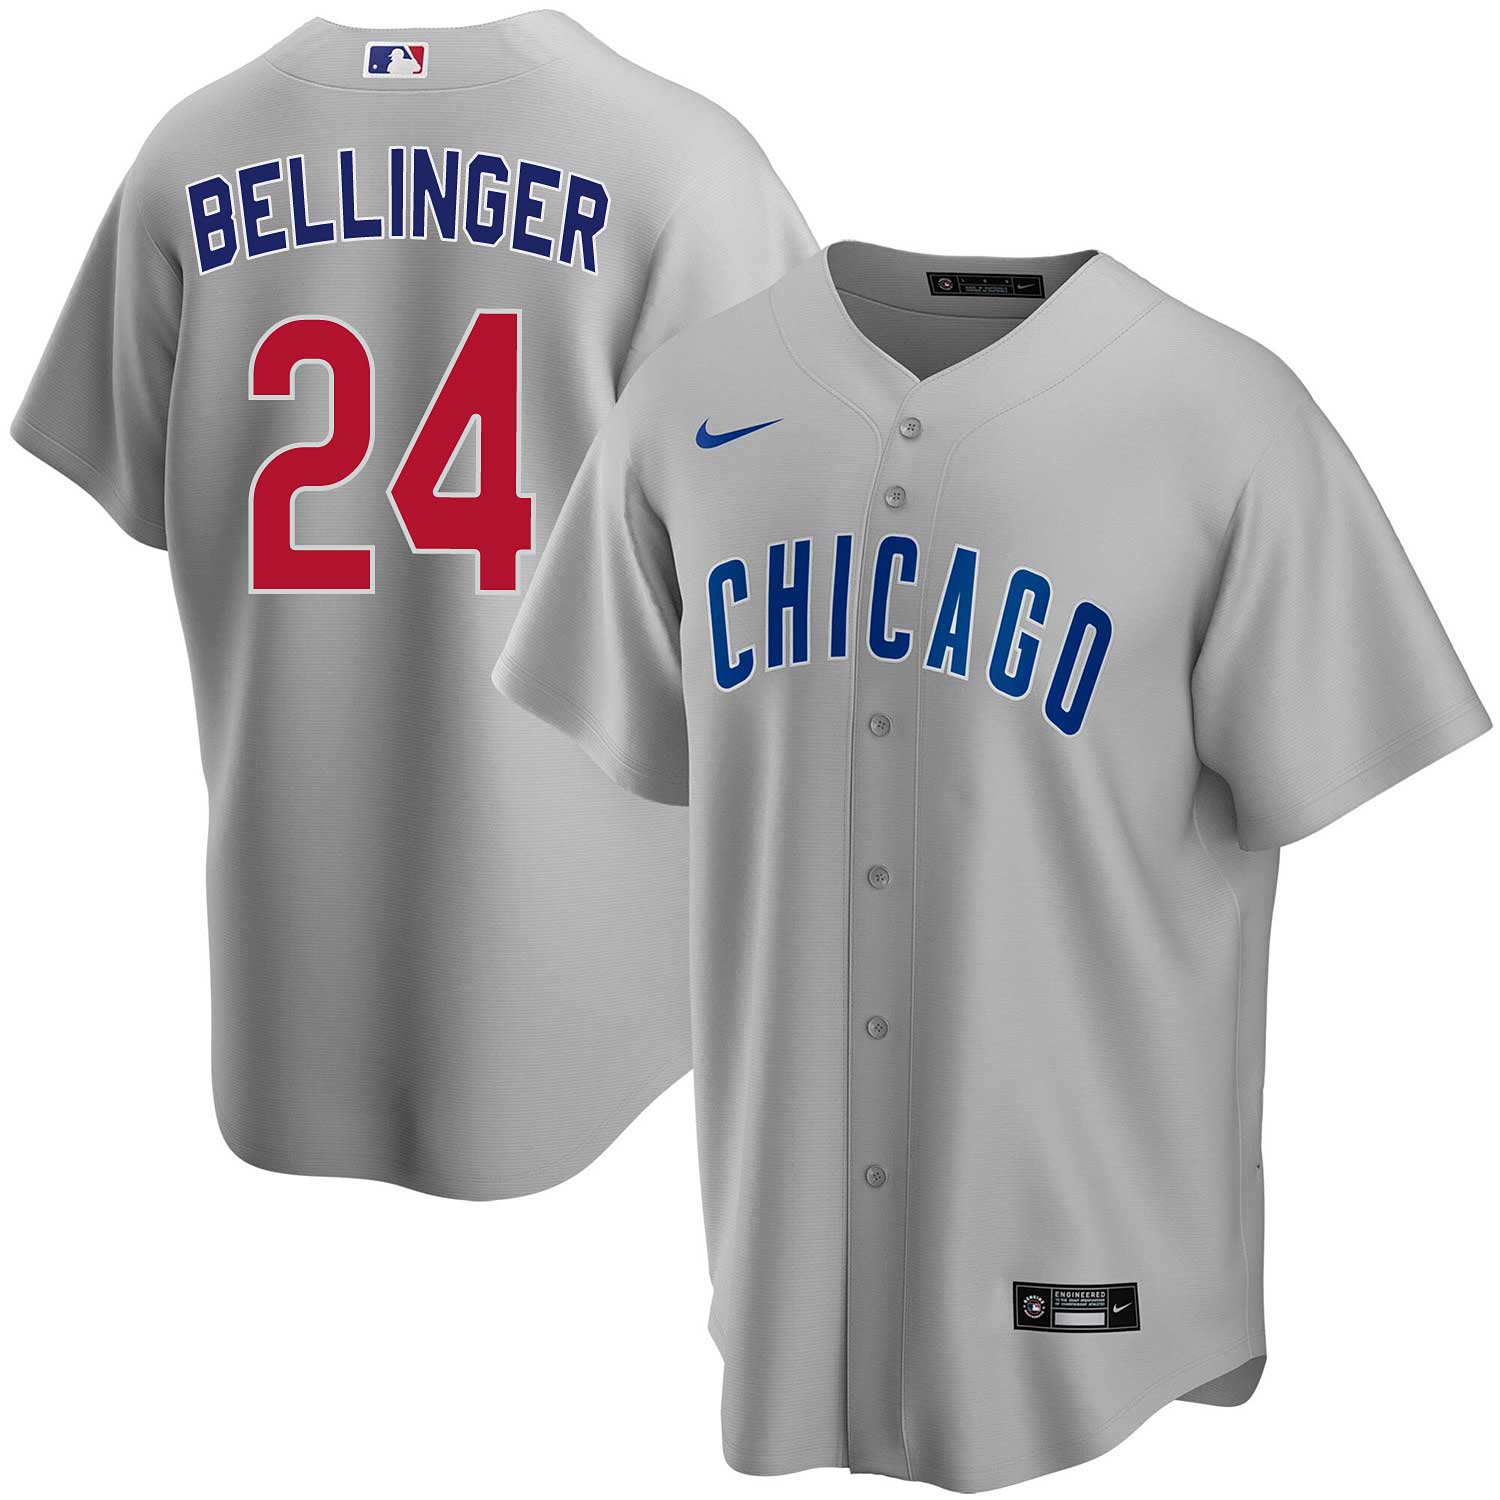 Nike / MLB Cody Bellinger Chicago Cubs Home Authentic Jersey by Nike